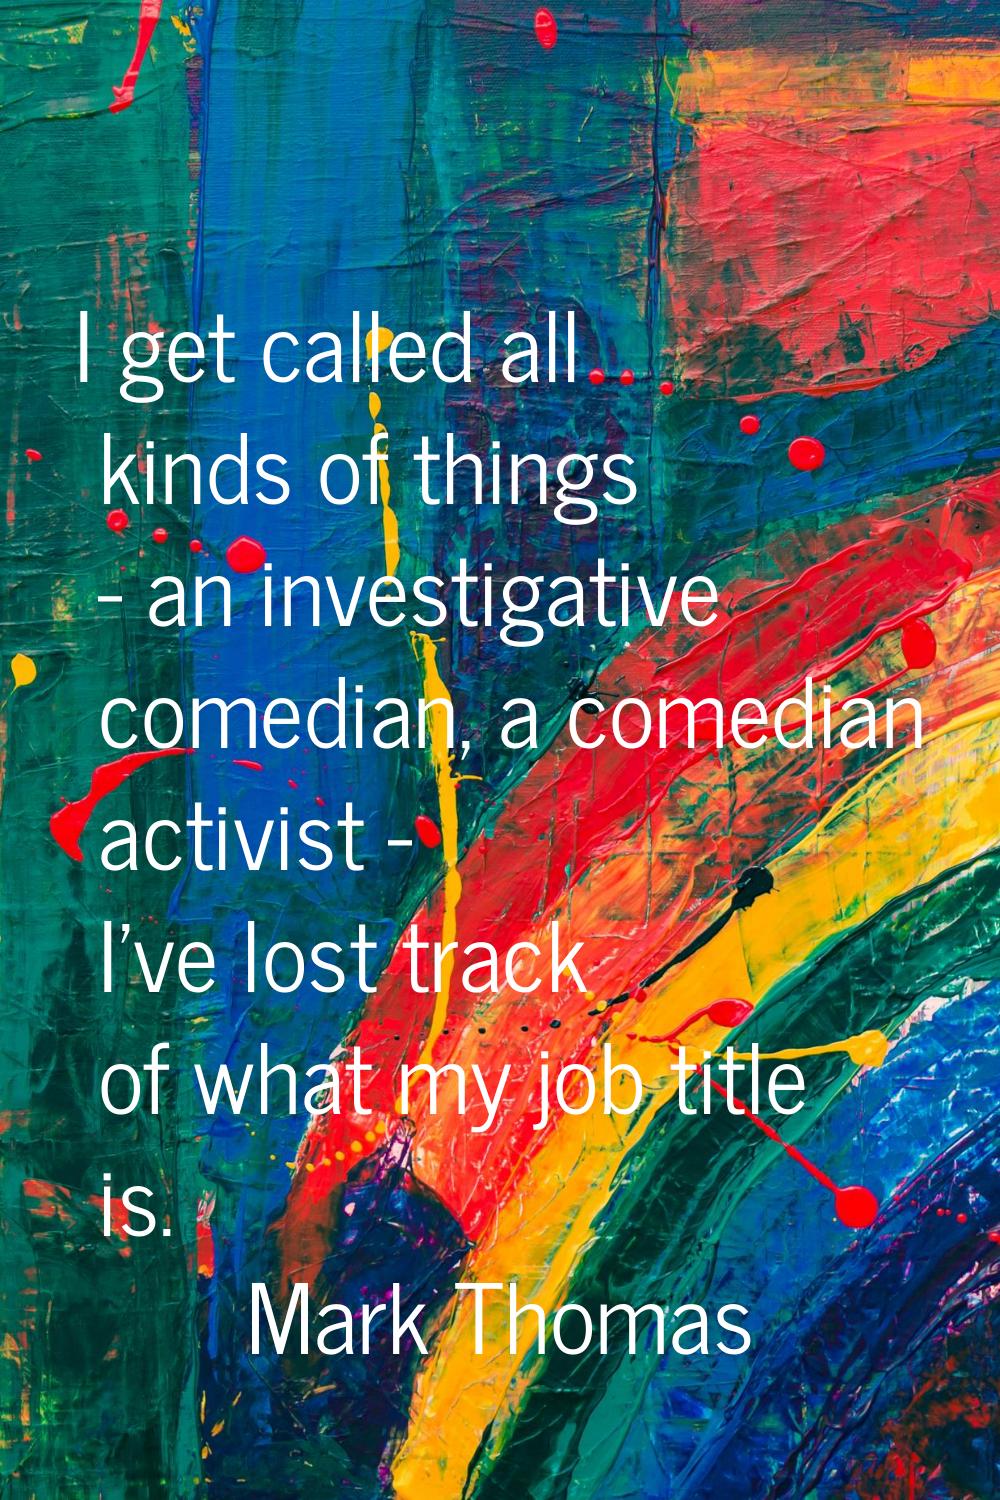 I get called all kinds of things - an investigative comedian, a comedian activist - I've lost track